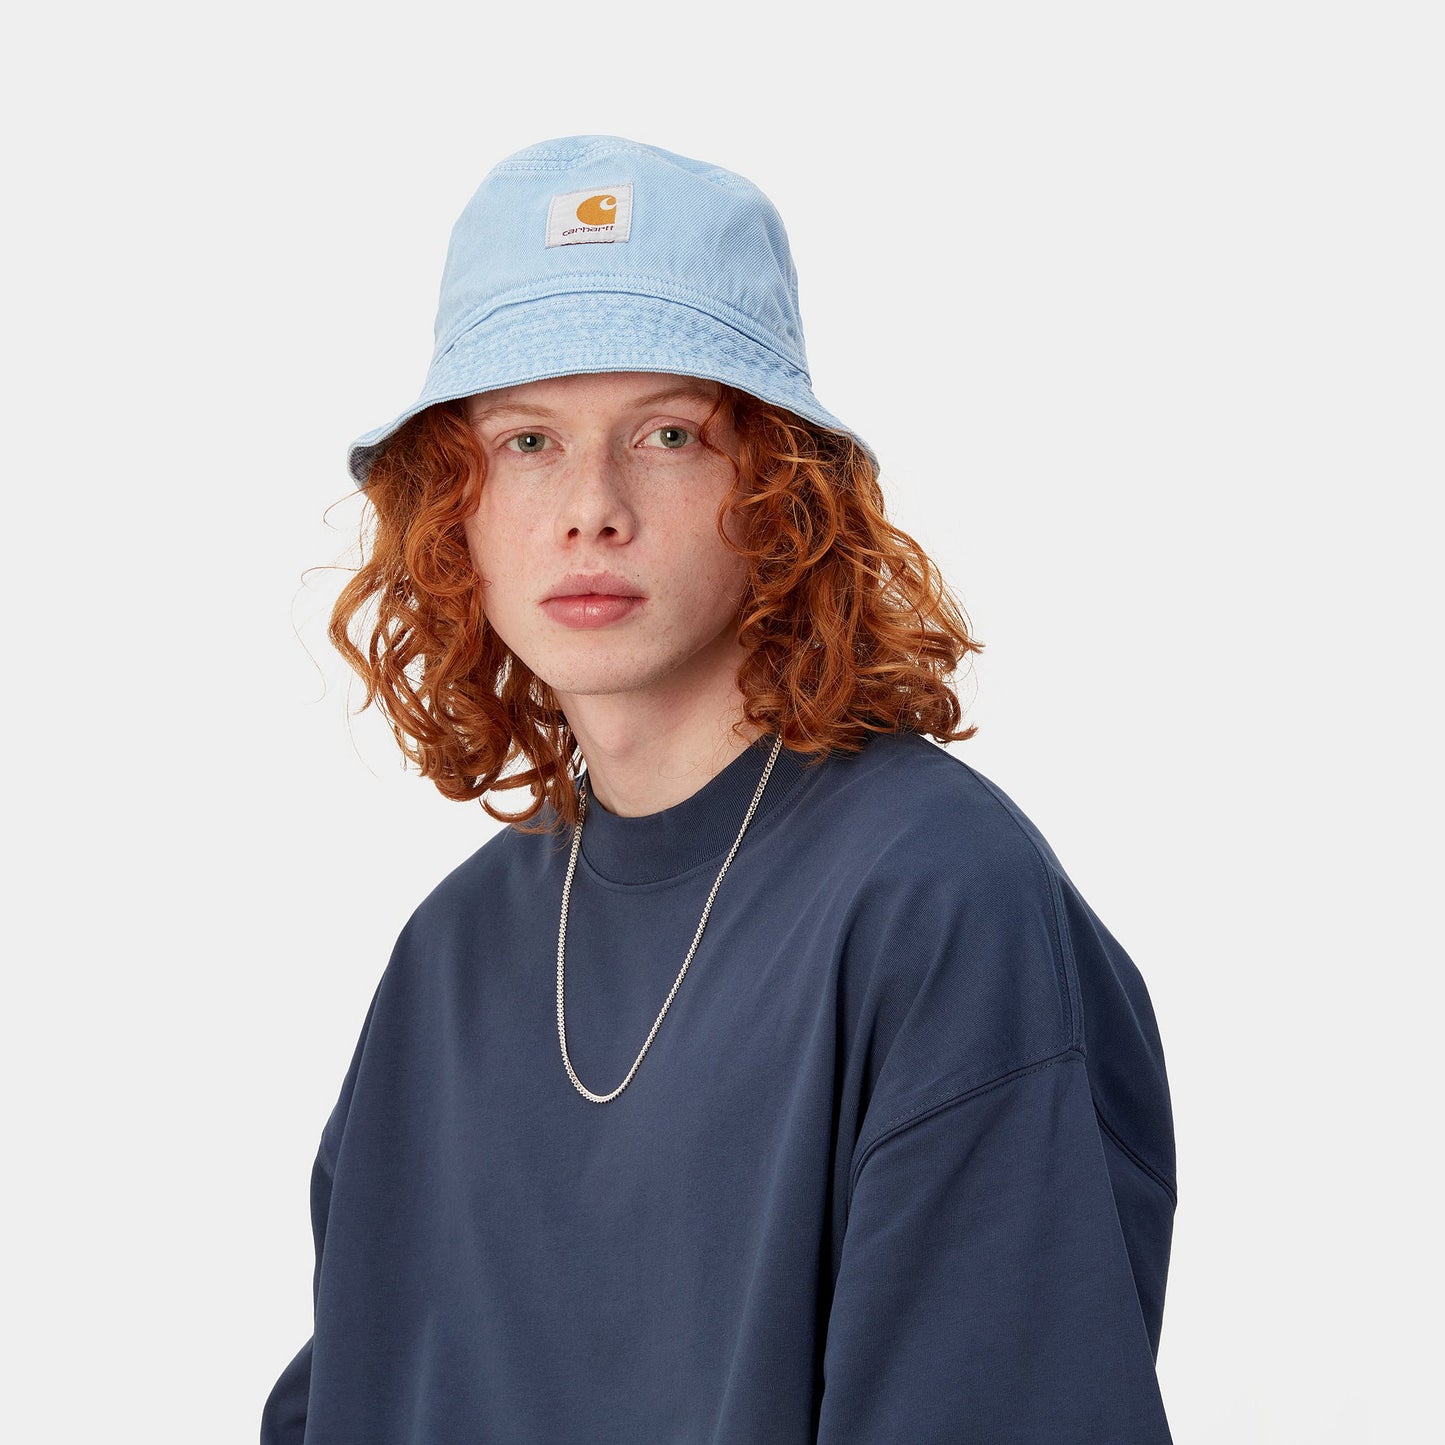 GARRISON BUCKET HAT - frosted blue stone dyed